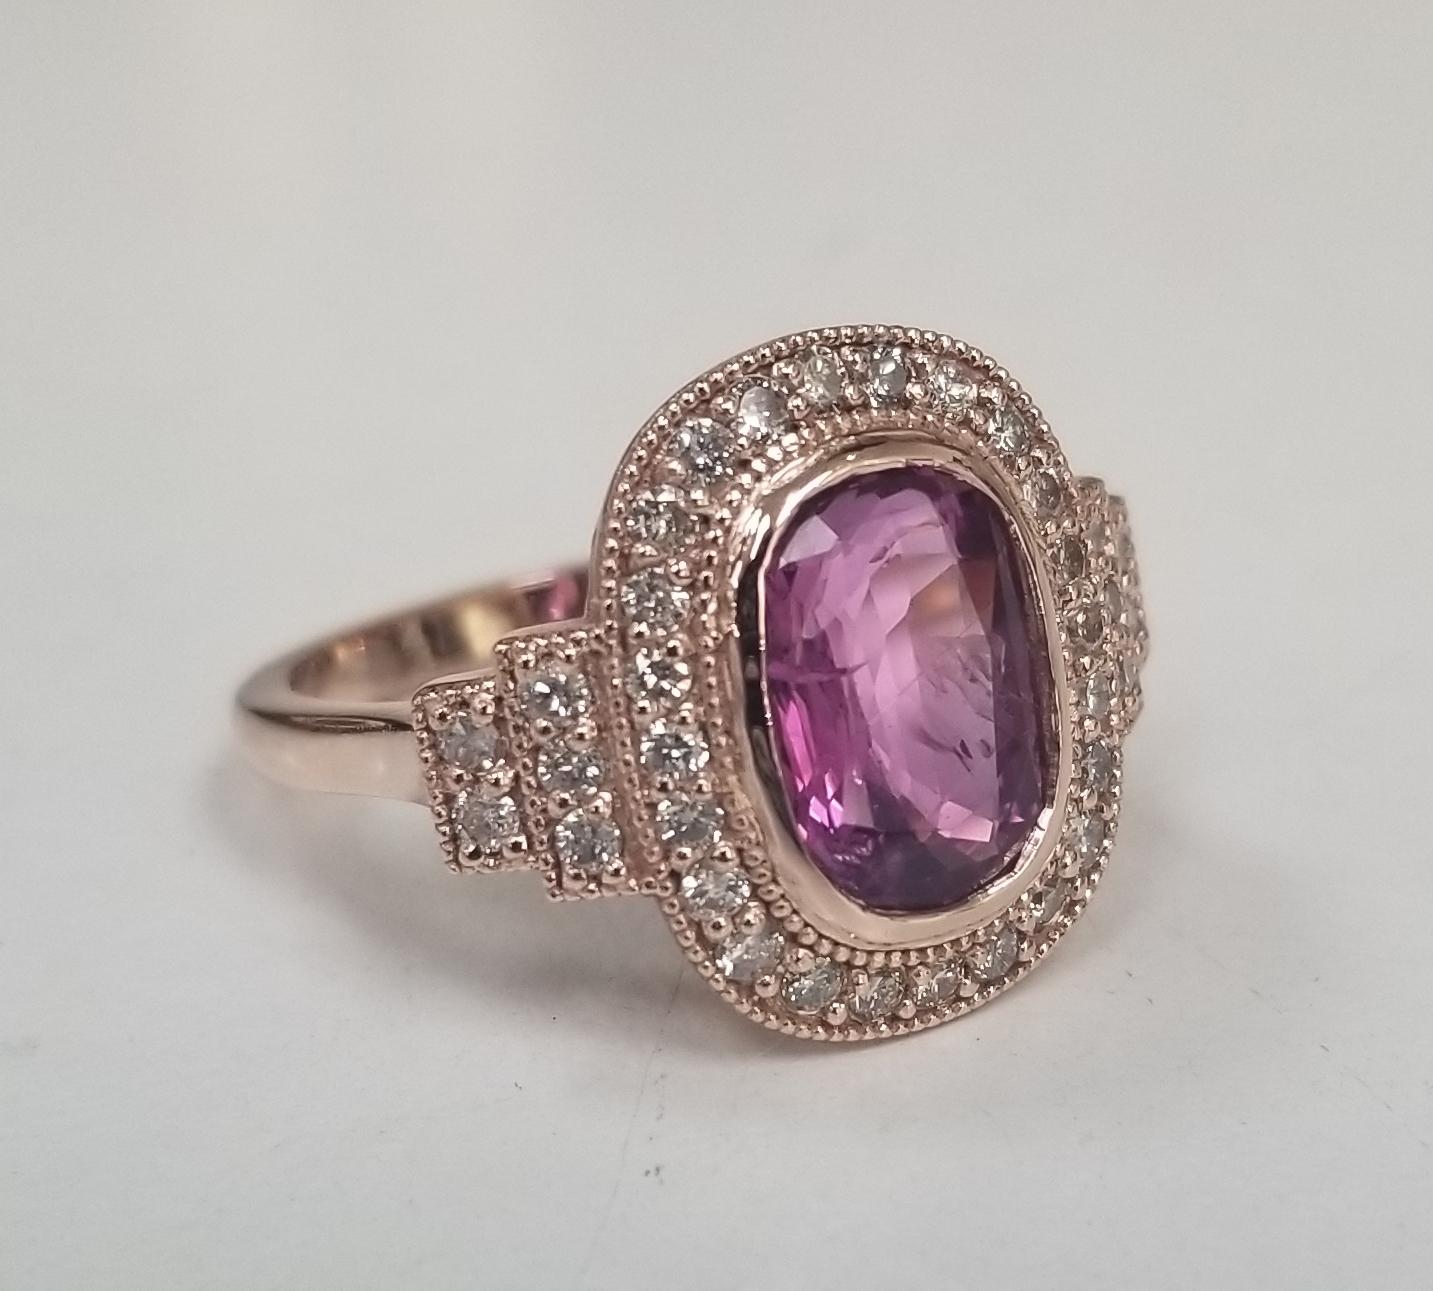 Diamond Specifications
Main Stone: Pink Tourmaline 3.20cts.
Additional Stones:Round diamonds                              
Carat Total Weight:   .65ctw
Color:   G
Clarity:   VS1-SI1
Jewelry Specifications
Brand:Custom
Metal: 14k rose gold
Type: